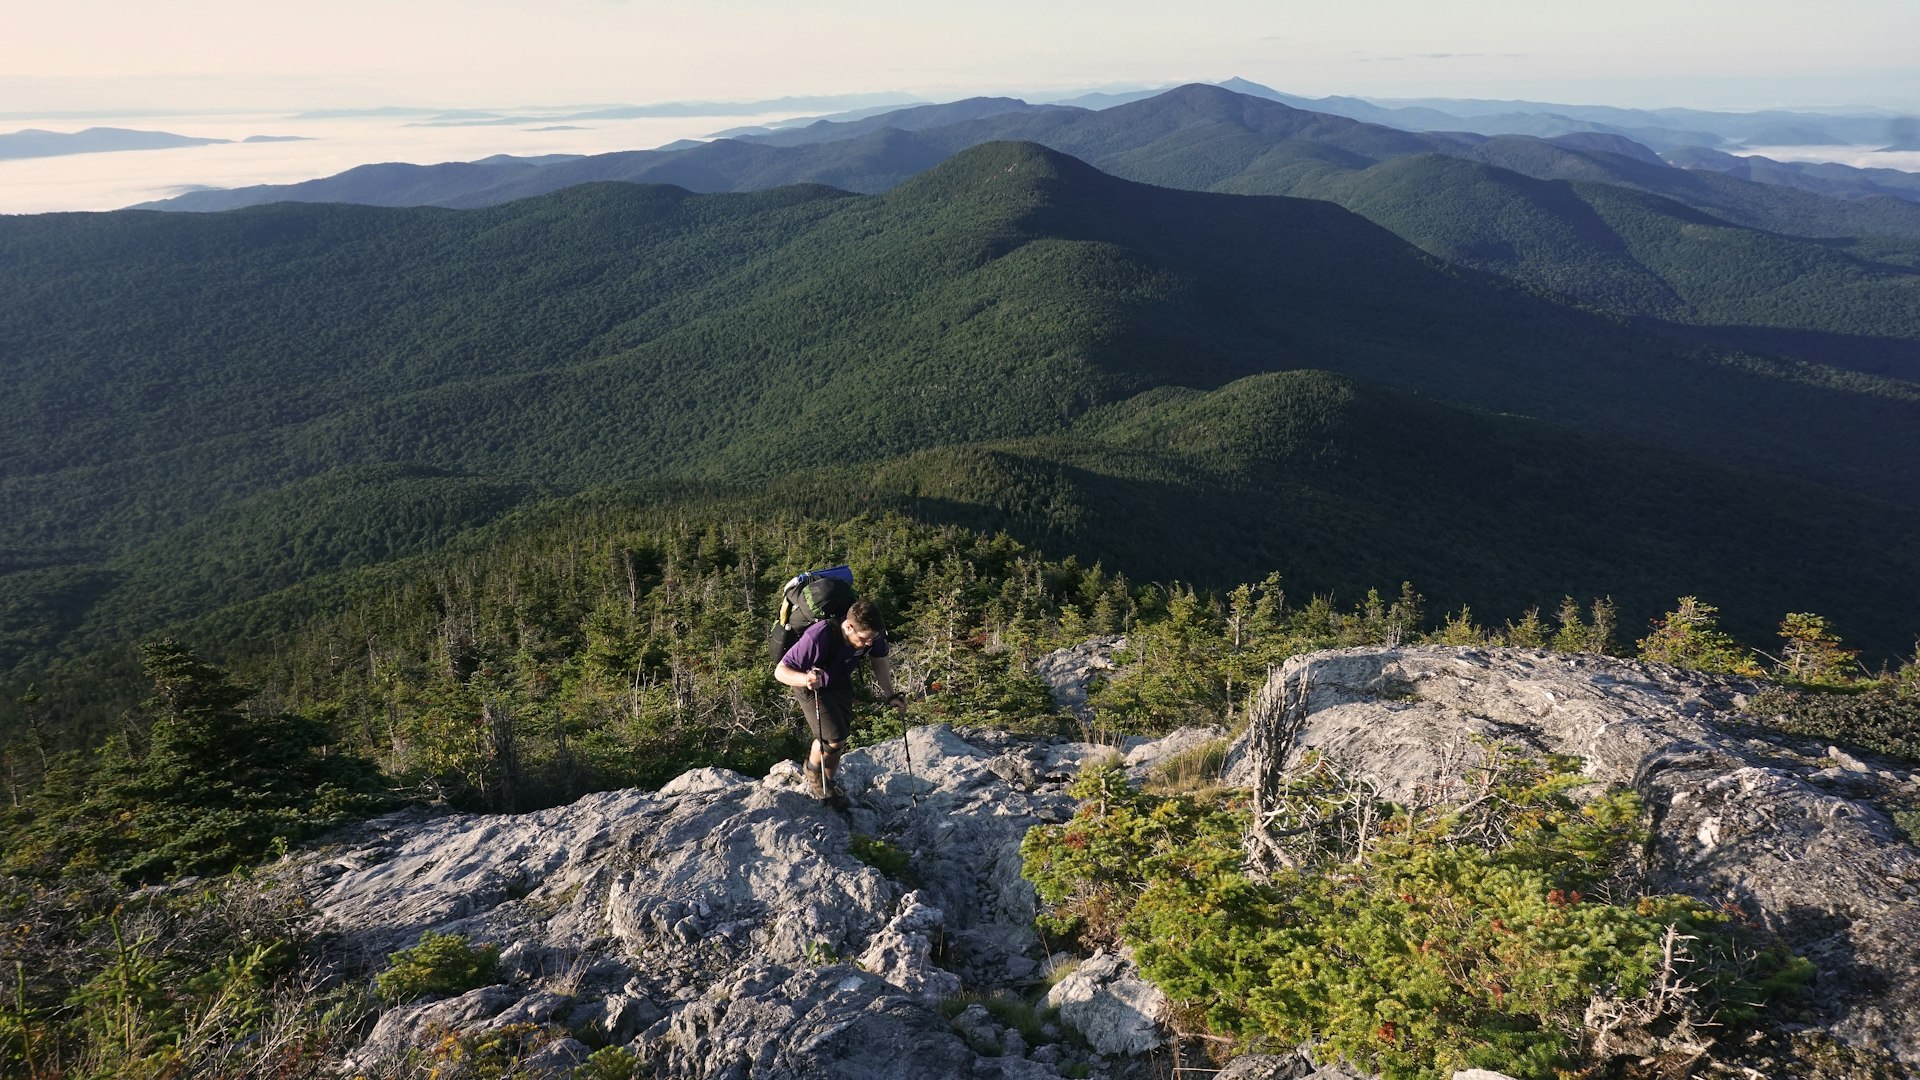 A hiker on the rocky Long Trail, Mt. Mansfield, Vermont